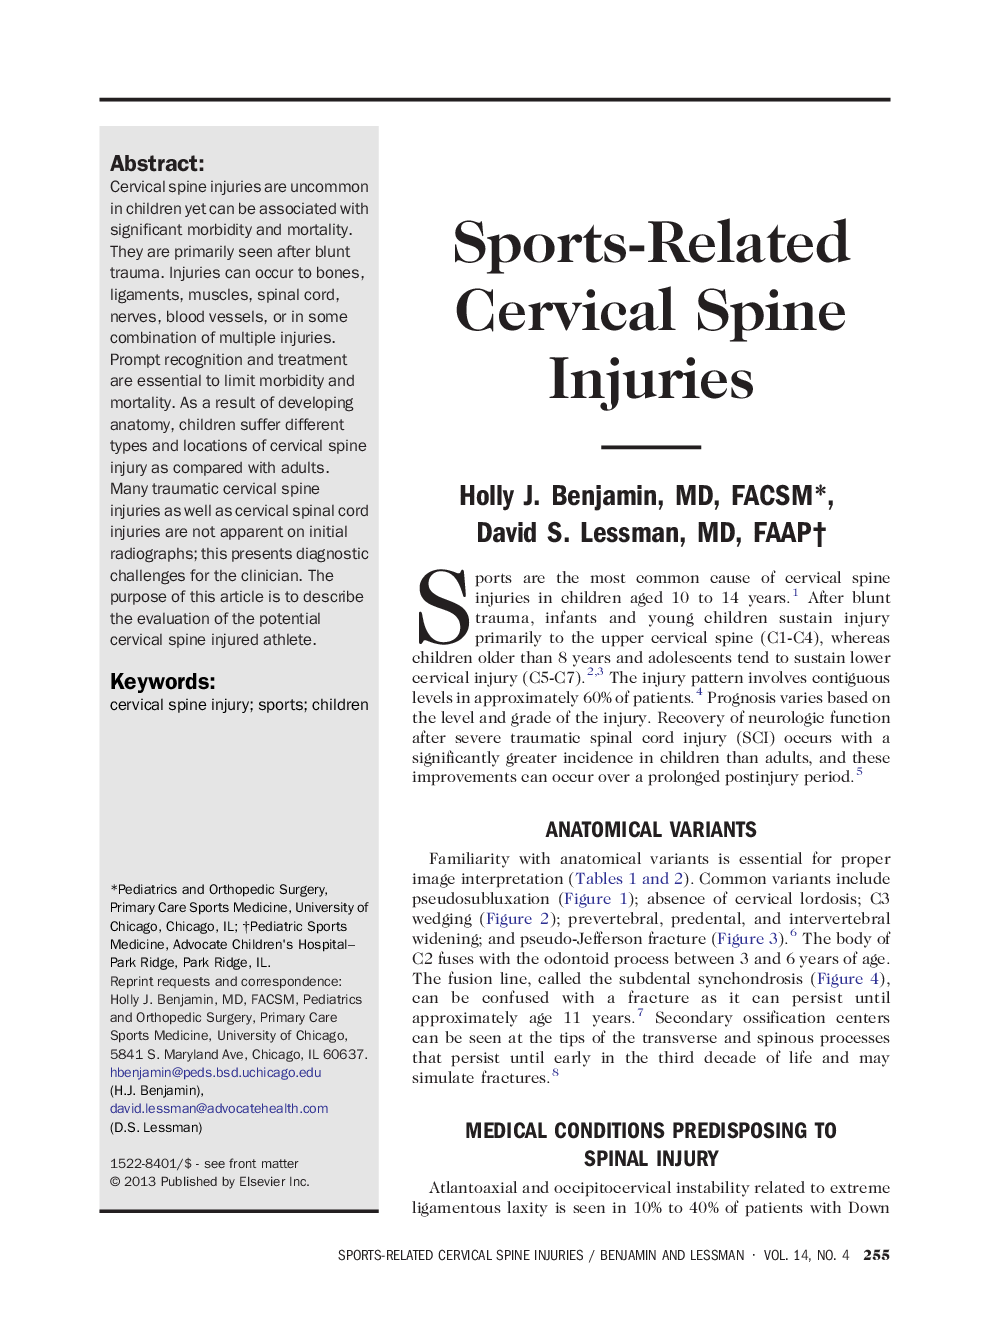 Sports-Related Cervical Spine Injuries